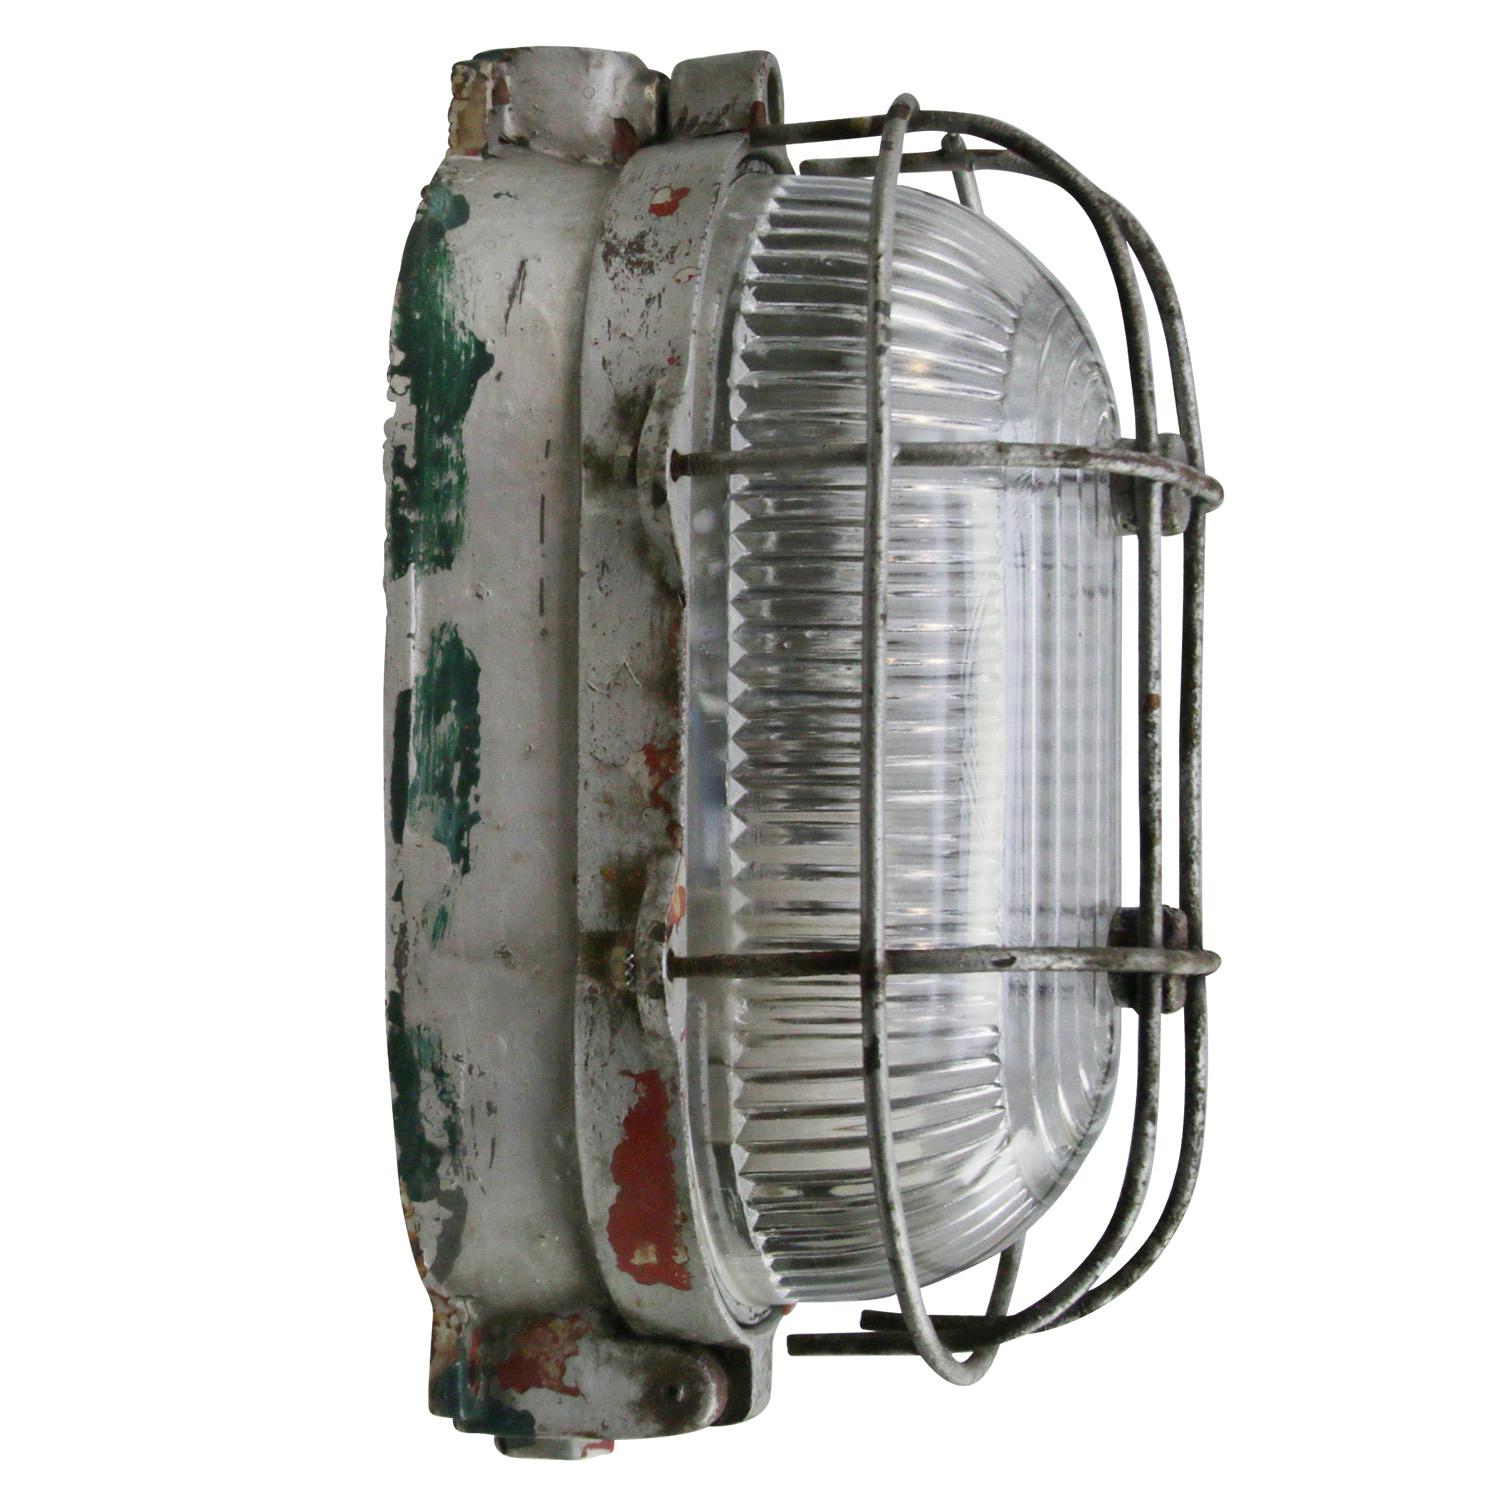 Industrial wall or ceiling lamp
cast iron, clear Holophane glass

Weight: 3.70 kg / 8.2 lb

Priced per individual item. All lamps have been made suitable by international standards for incandescent light bulbs, energy-efficient and LED bulbs.